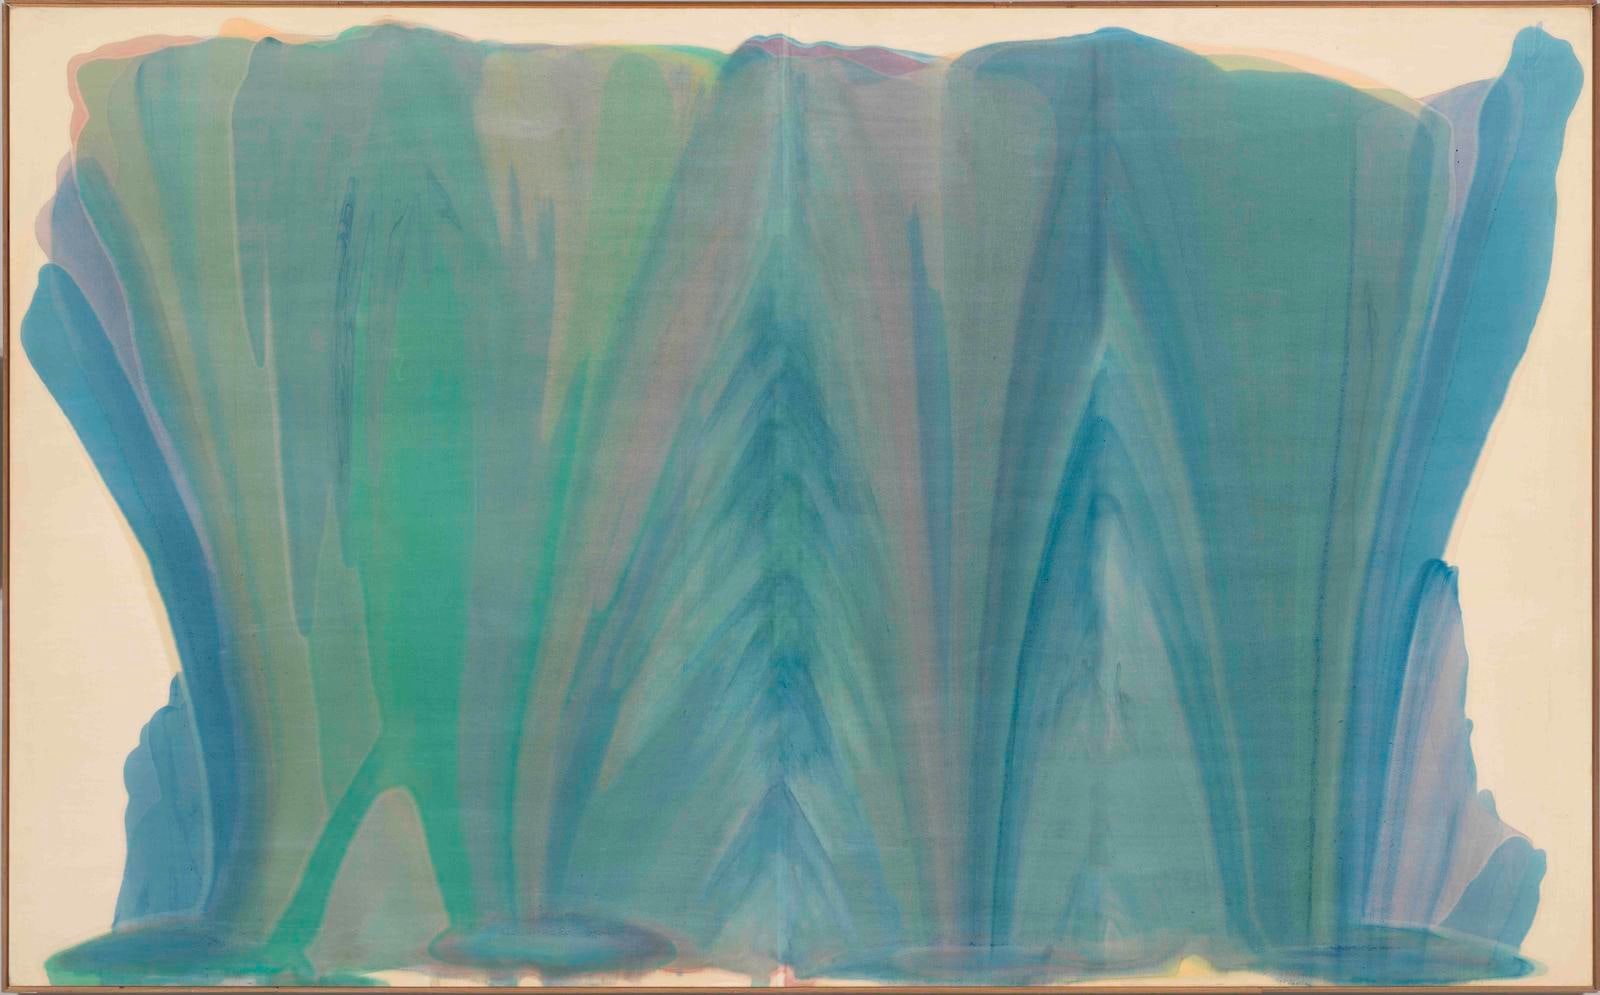 Tet
1958
acrylic resin (Magna) on canvas
94 1/8 x 152 1/8 inches (239.1 x 386.4 cm)
Whitney Museum of American Art, New York, purchase, with funds from the Friends of the Whitney Museum of American Art